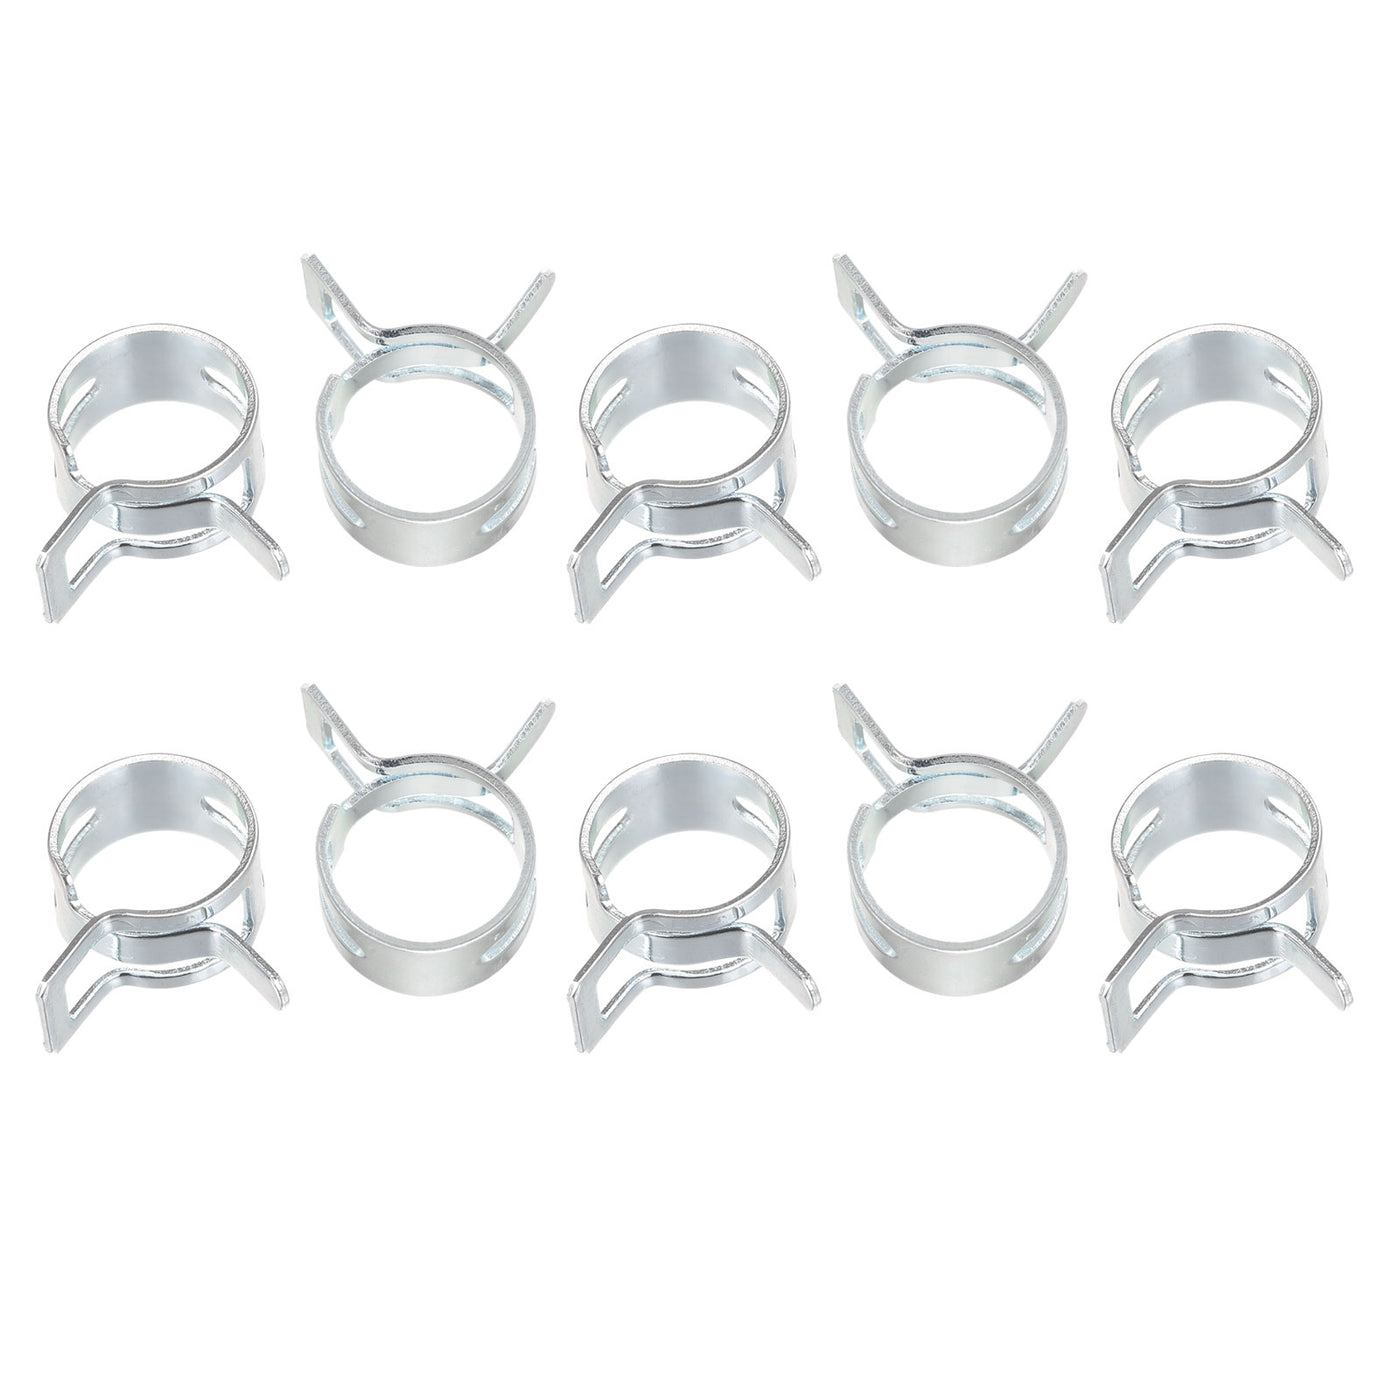 Uxcell Uxcell Spring Hose Clamp, 50pcs 65Mn Steel 18mm Low Pressure Air Clip, Zinc Plated